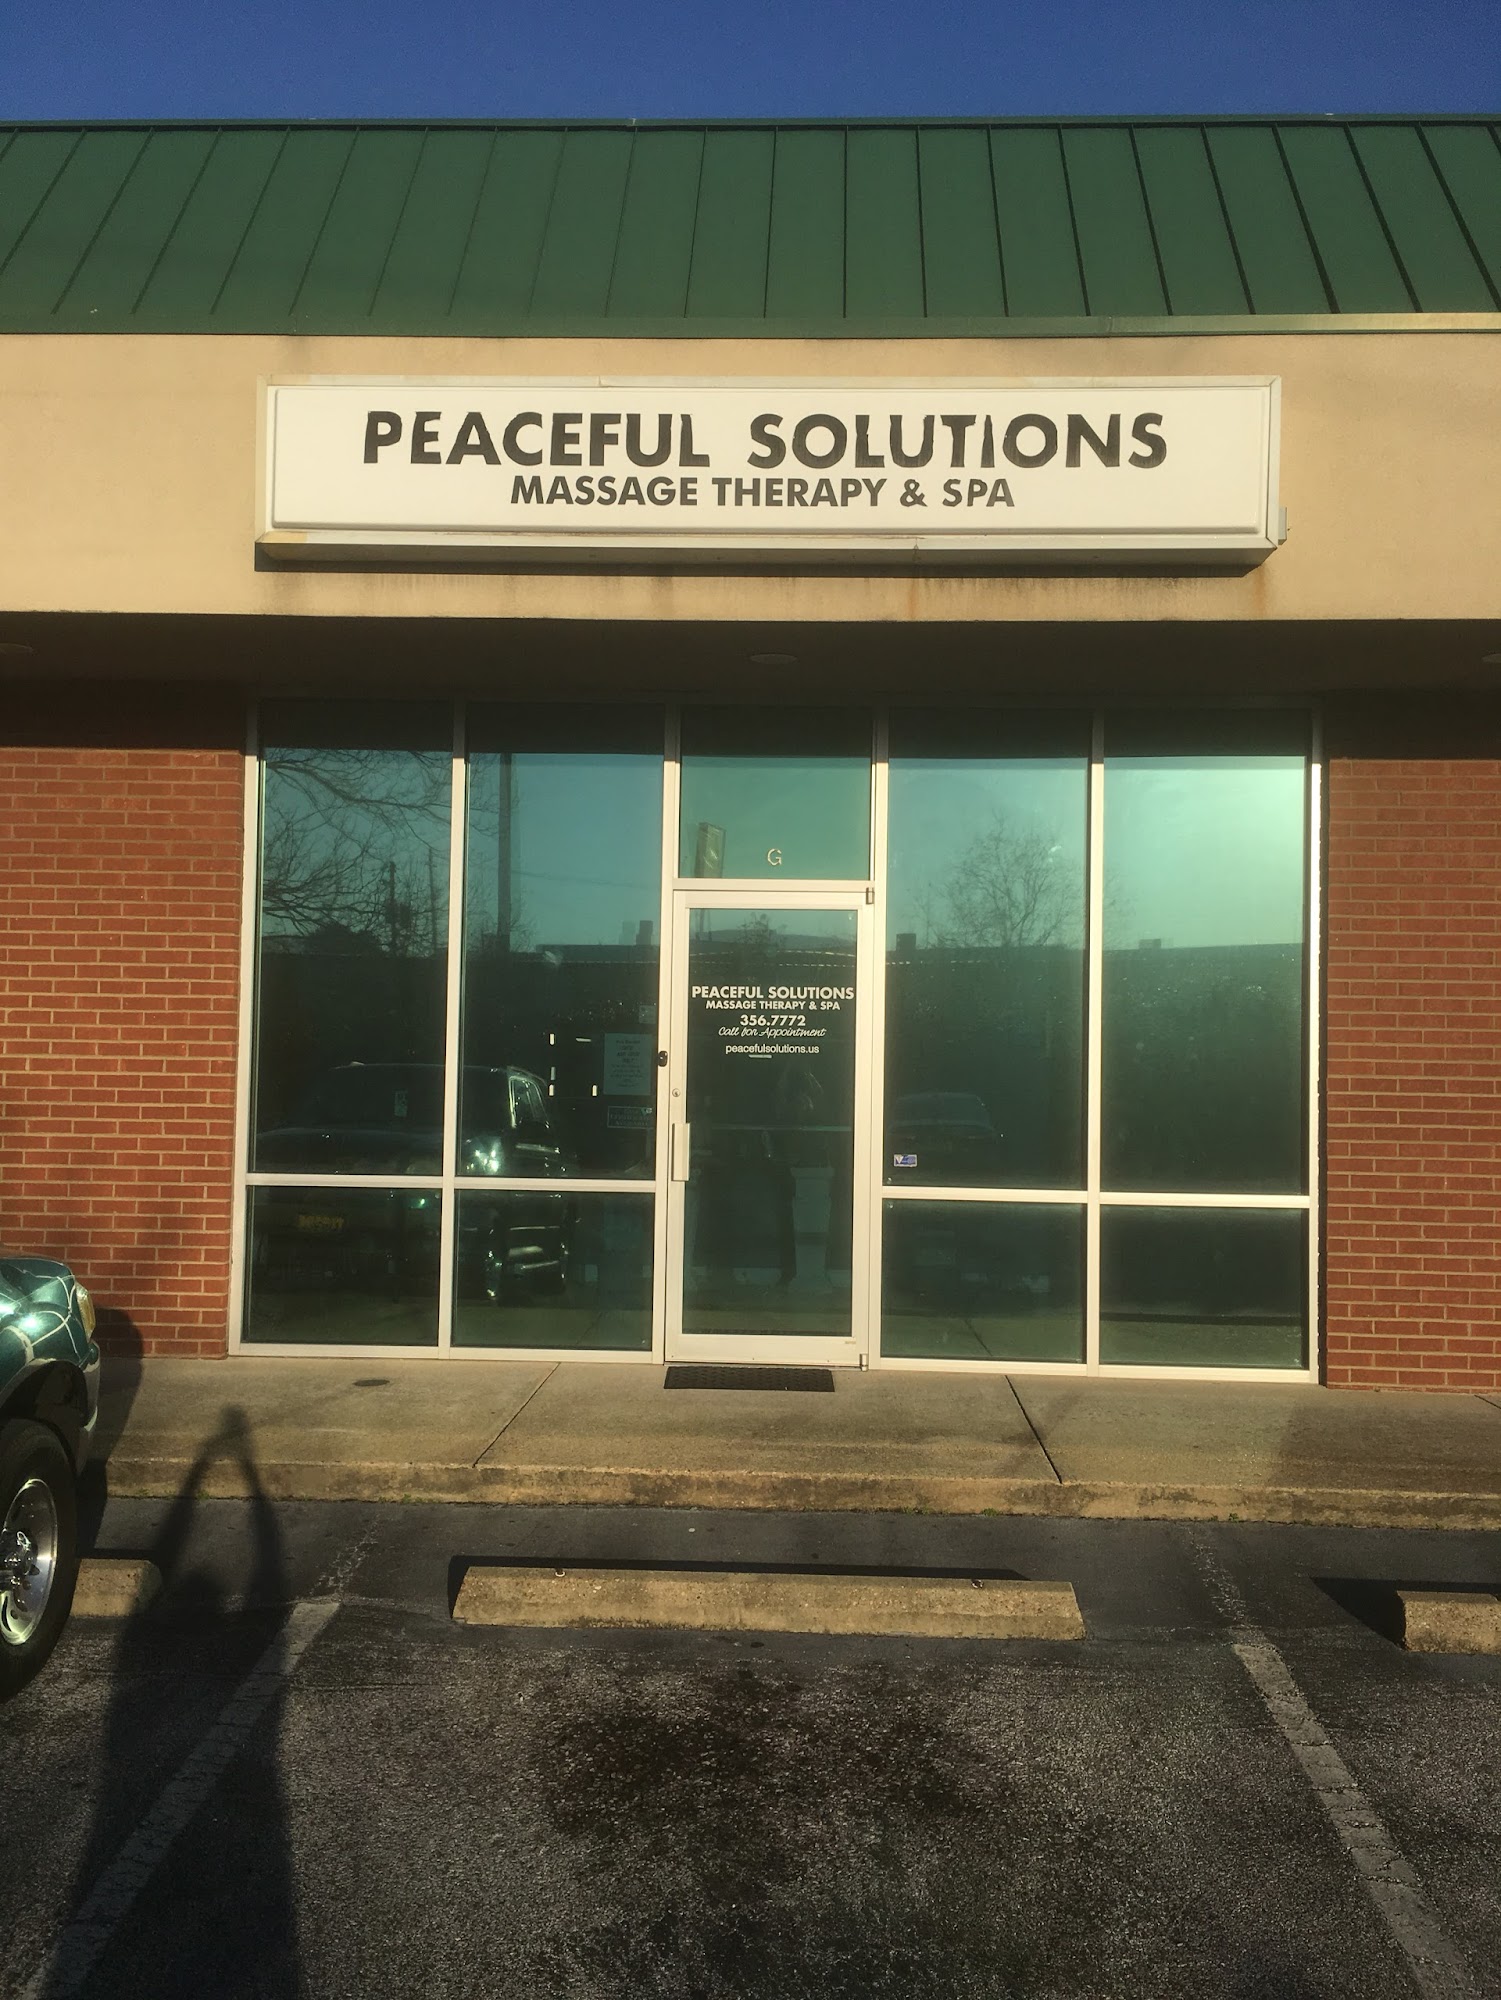 Peaceful Solutions